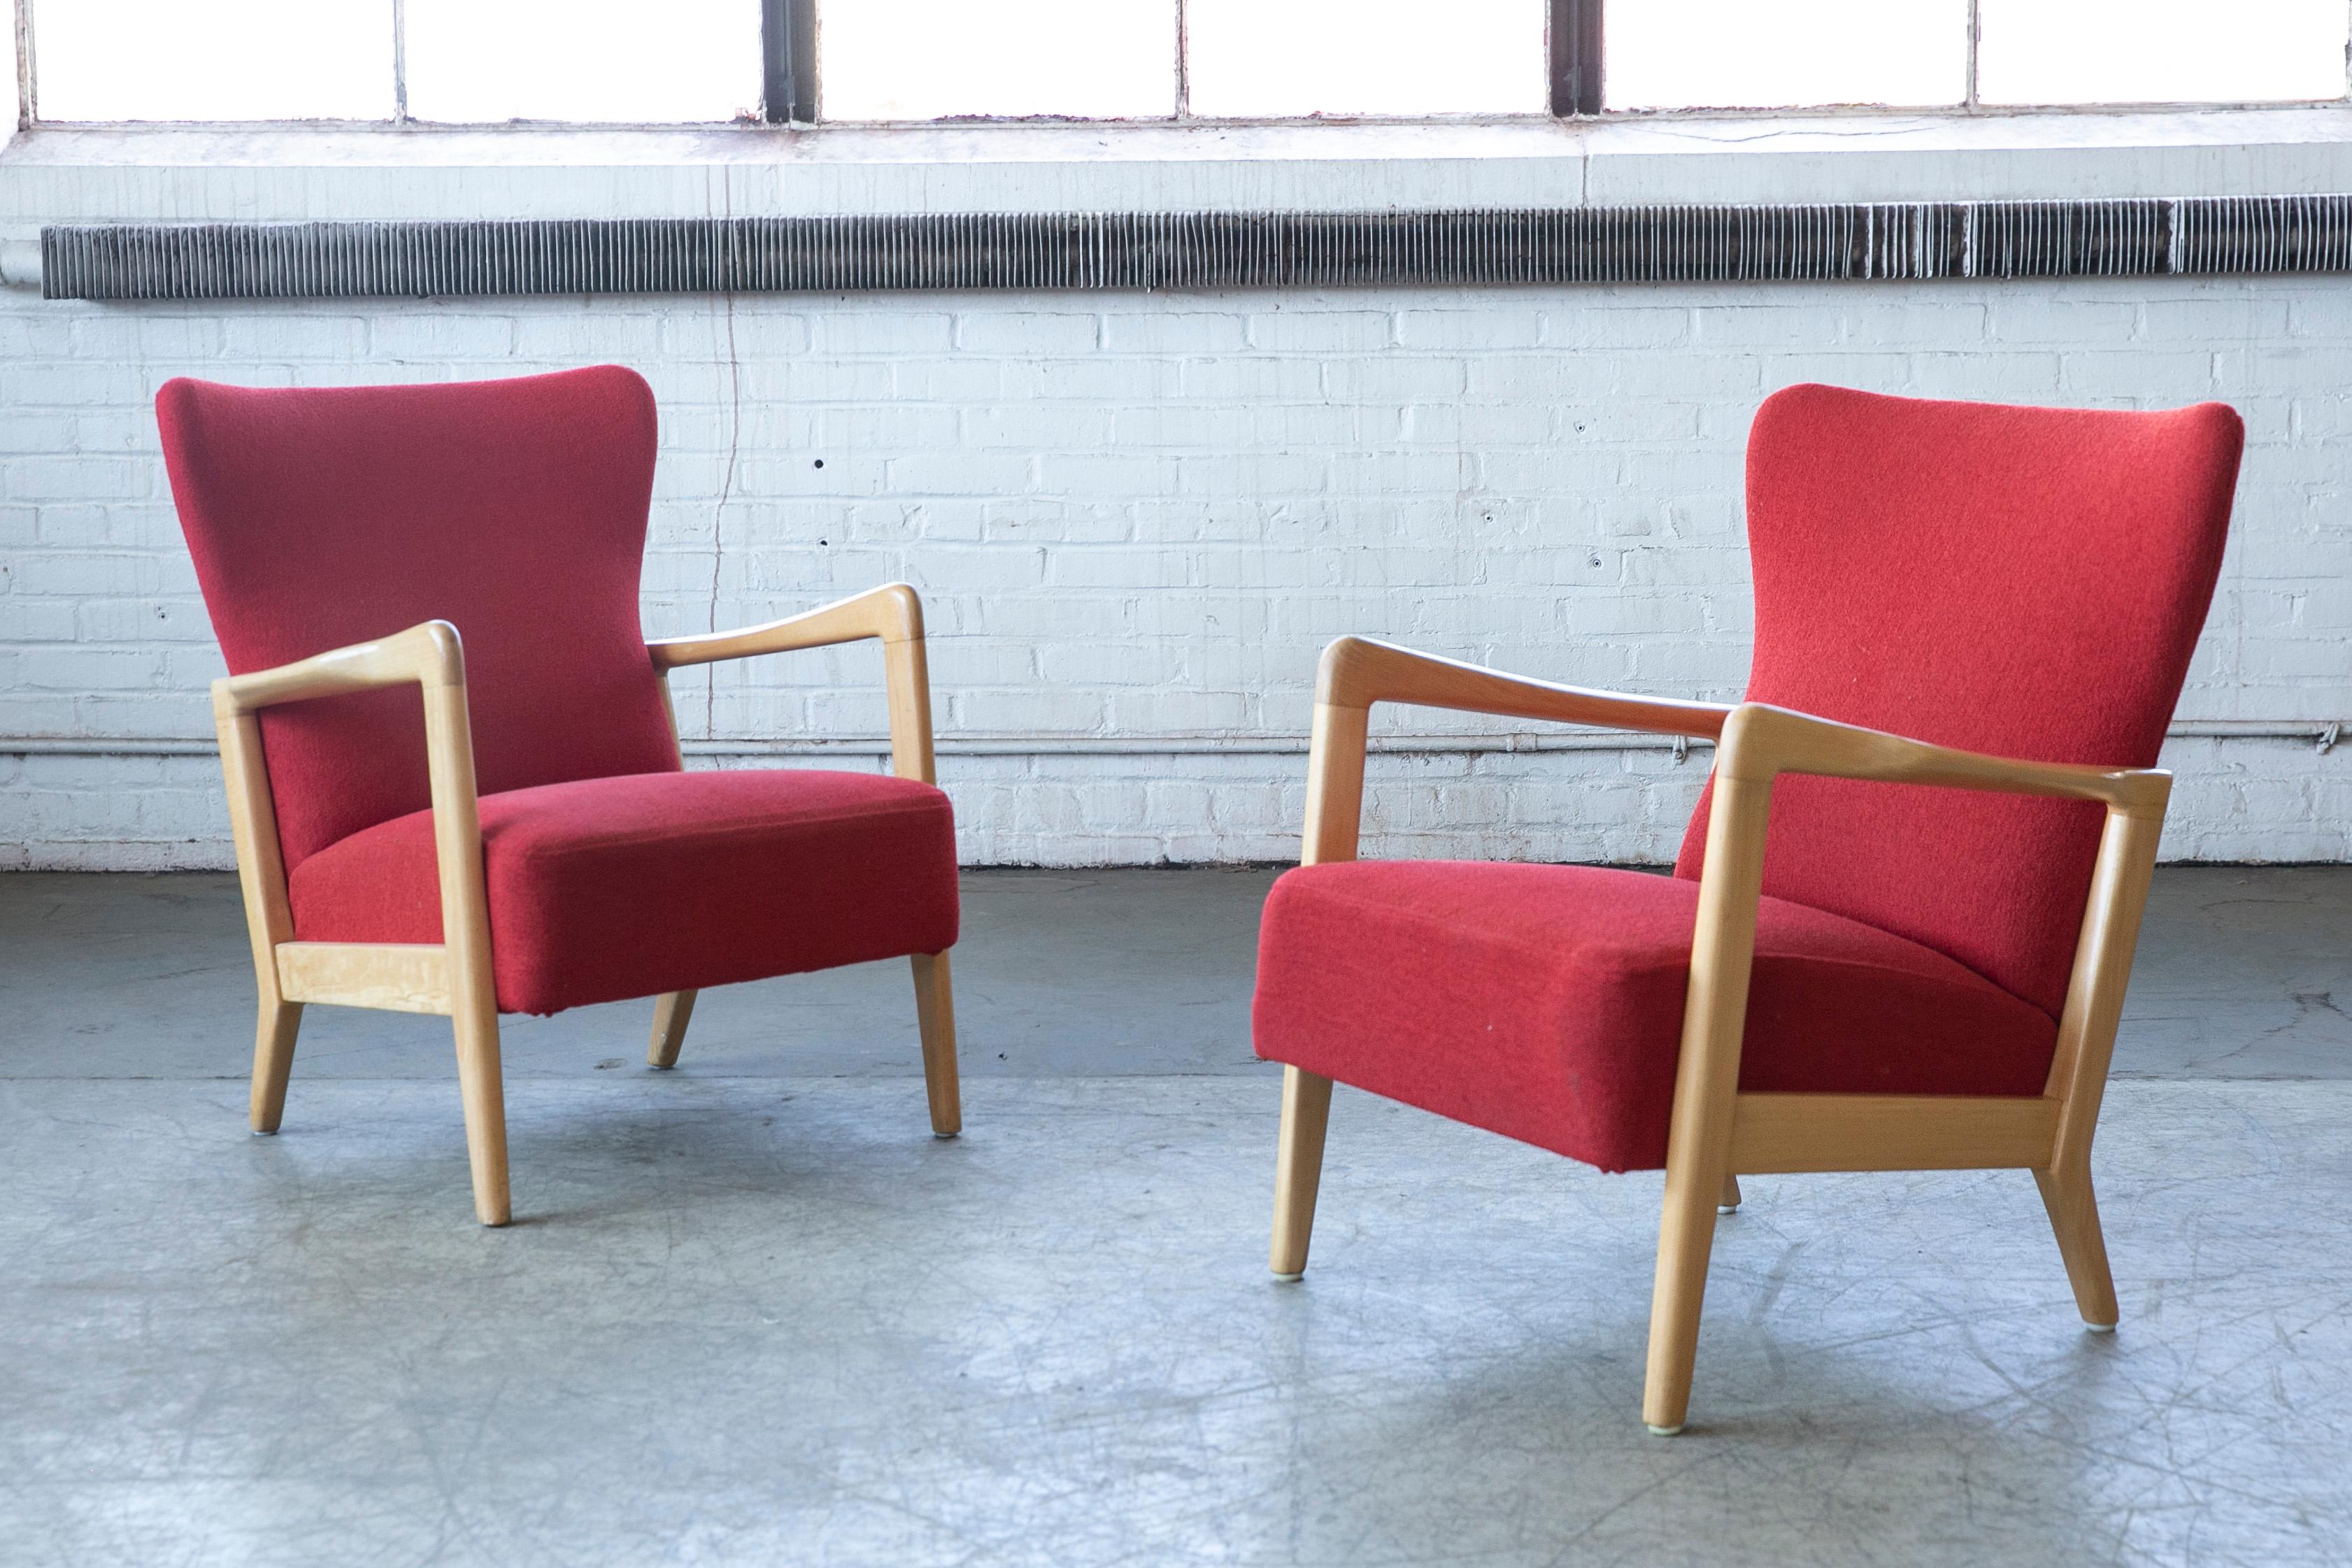 Very stylish open armchairs designed by Soren Hansen for Fritz Hansen in the early 1940s but judging from the wood color probably manufactured in the early 1960's. This model was mainly made with high backs this set is has lower backrests adding a